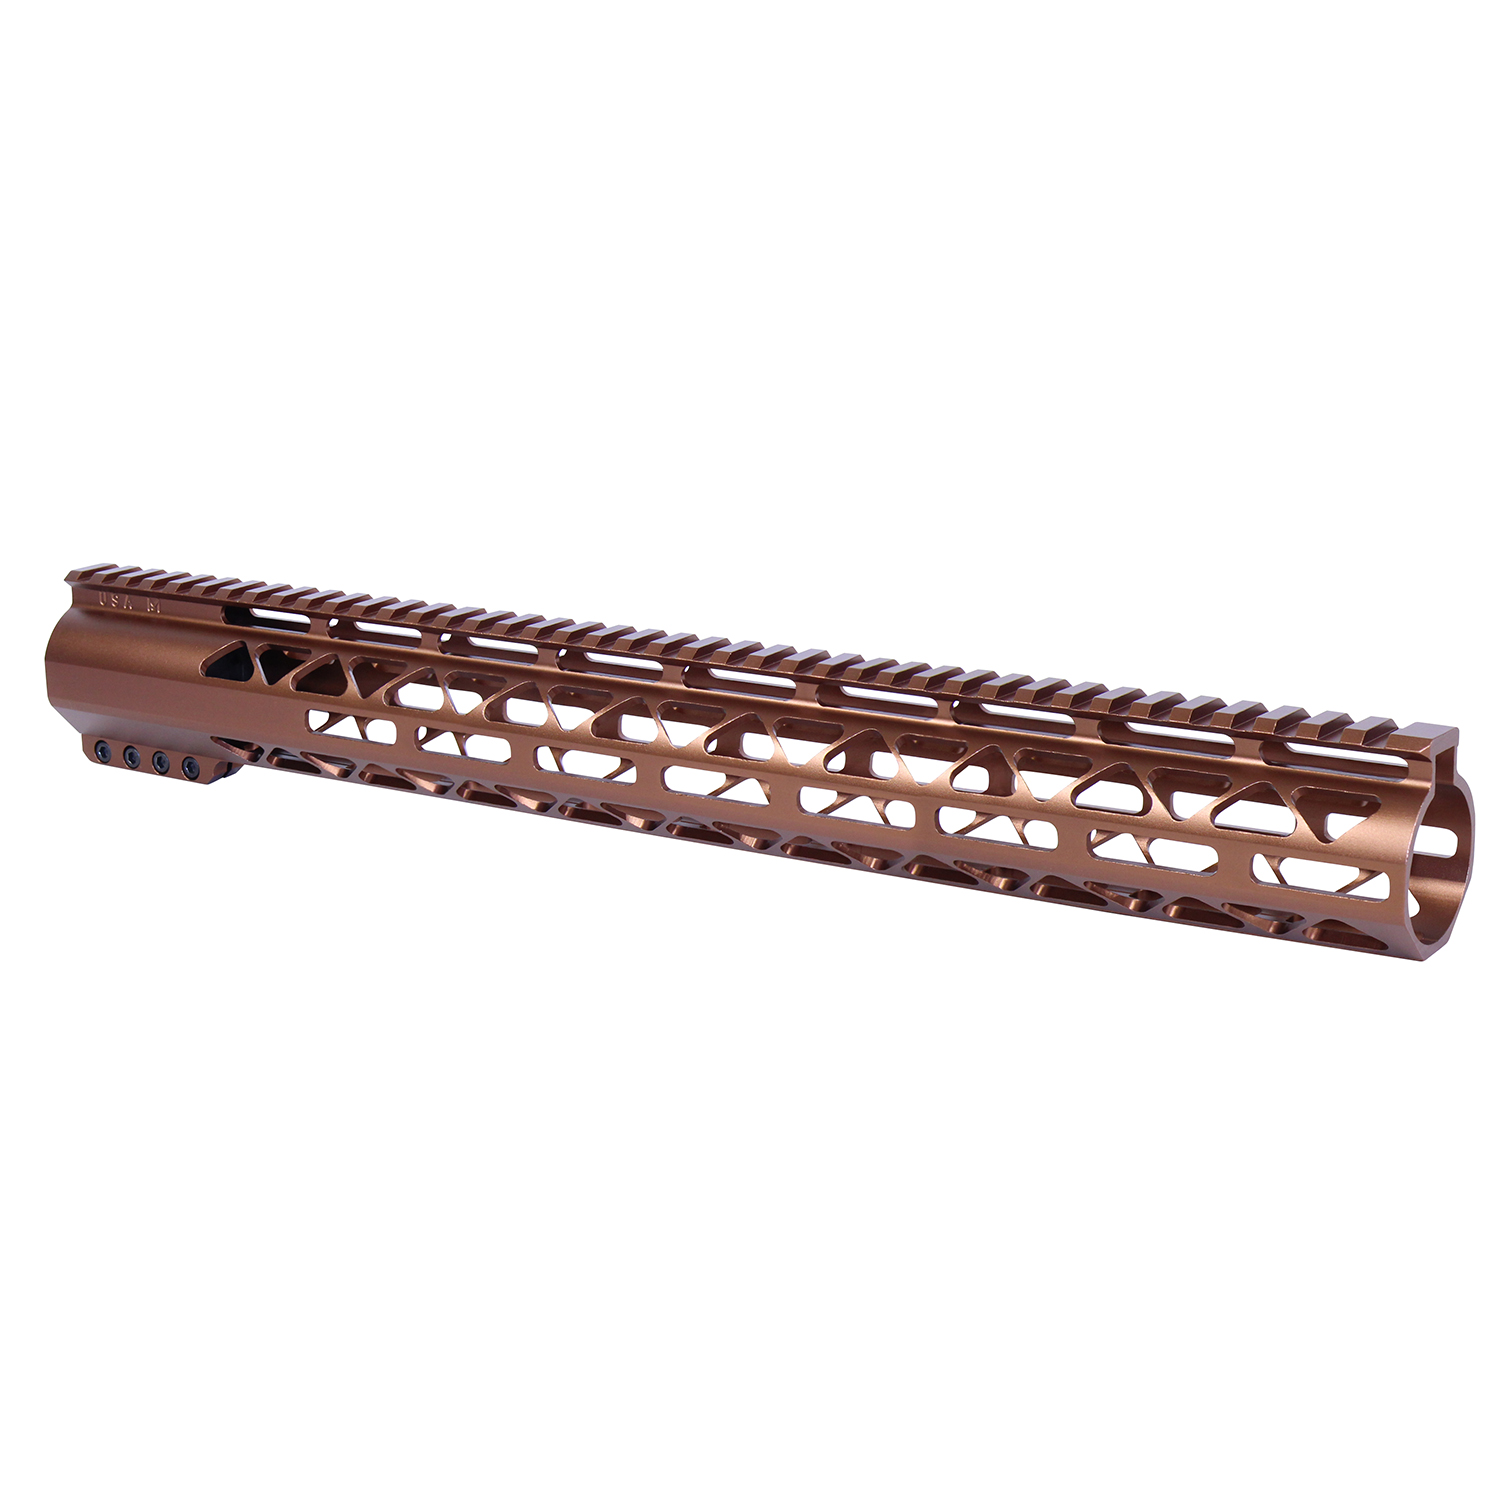 16.5" AIR-LOK Series M-LOK Compression Free Floating Handguard With Monolithic Top Rail (.308 Cal) (Anodized Bronze)